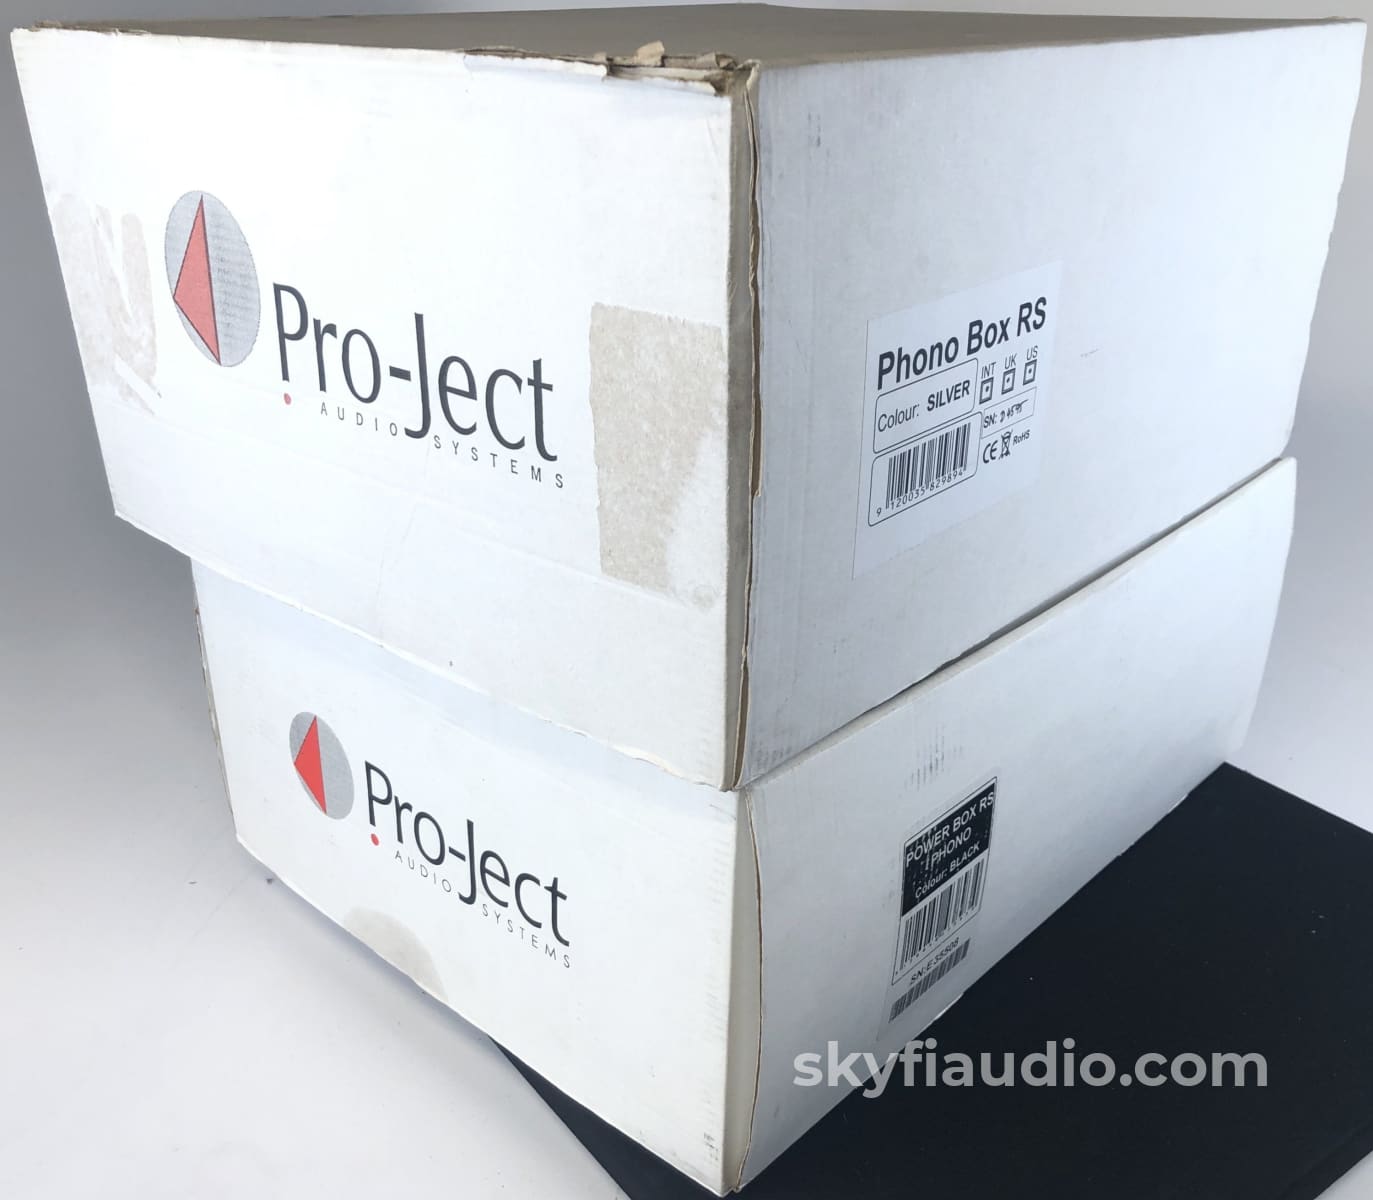 Pro-Ject Phono Box Rs - With Power Outboard Battery Based Supply Complete Set Preamplifier